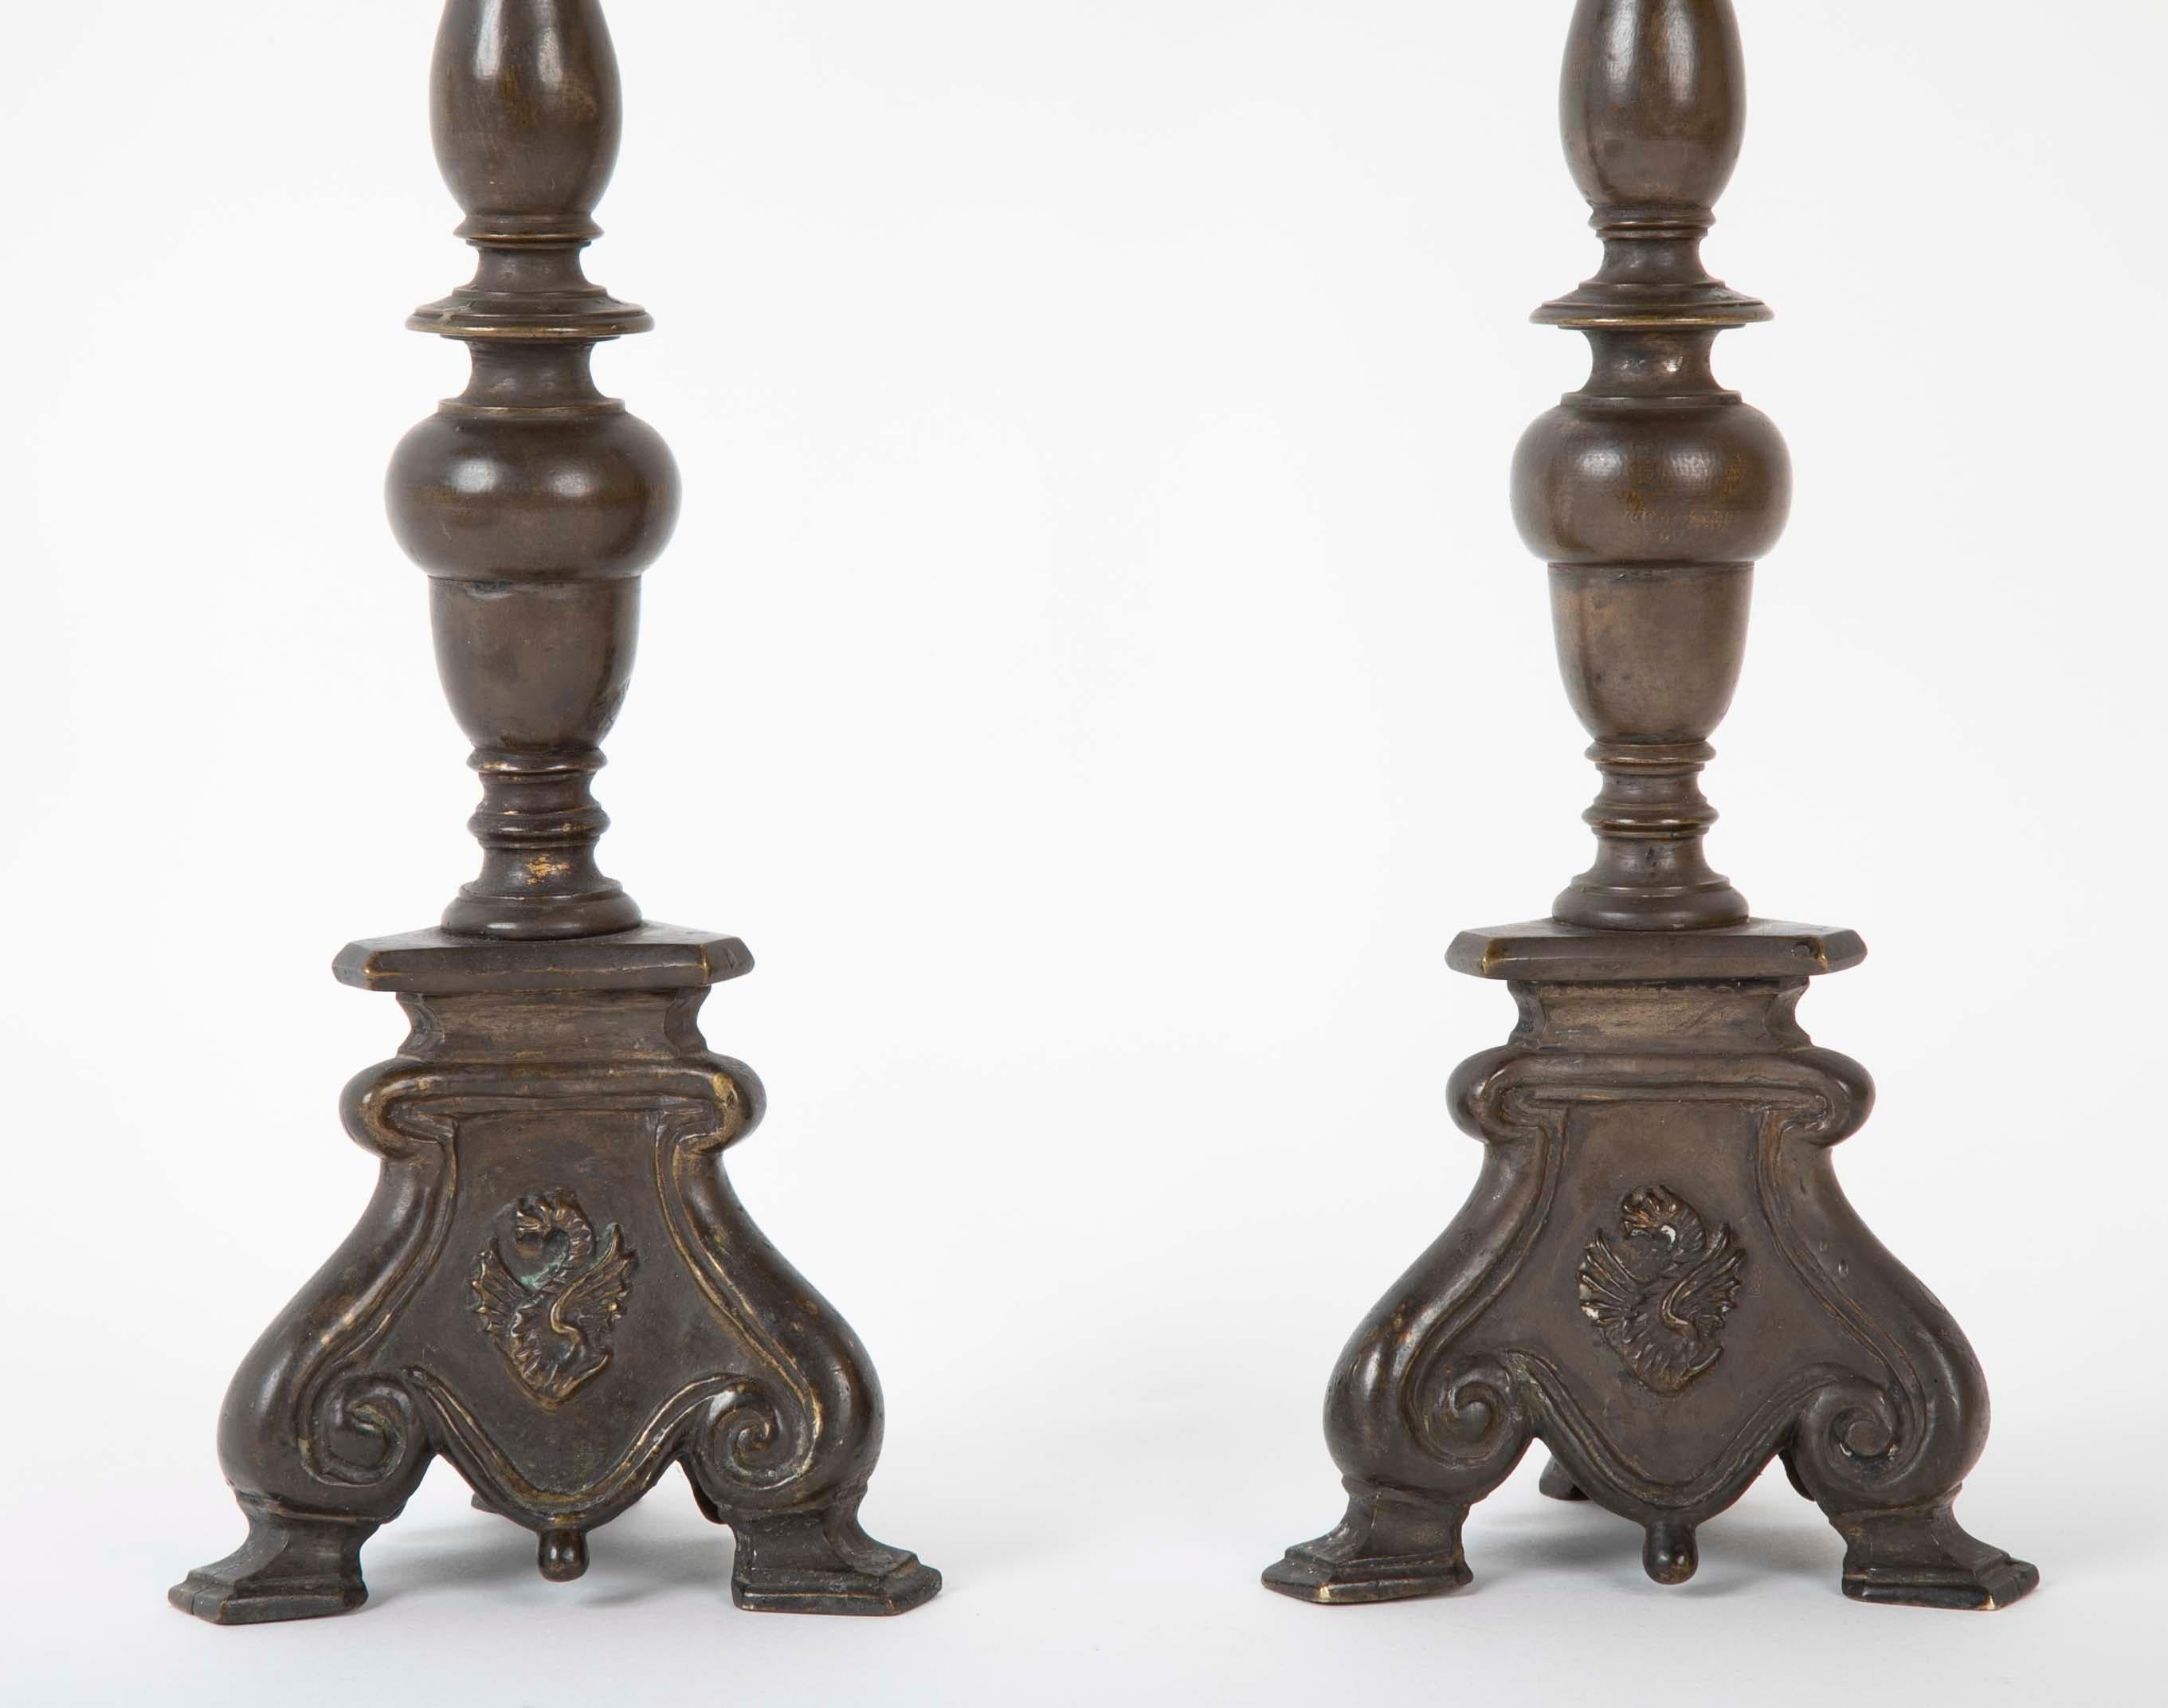 Pair of bronze pricket sticks with an unusual dragon motif on the base. Each with a turned shaft supported by a tripod footed base, all three side decorated with a raised winged dragon. Italian, late 17th or early 18th century. A rich dark patina.